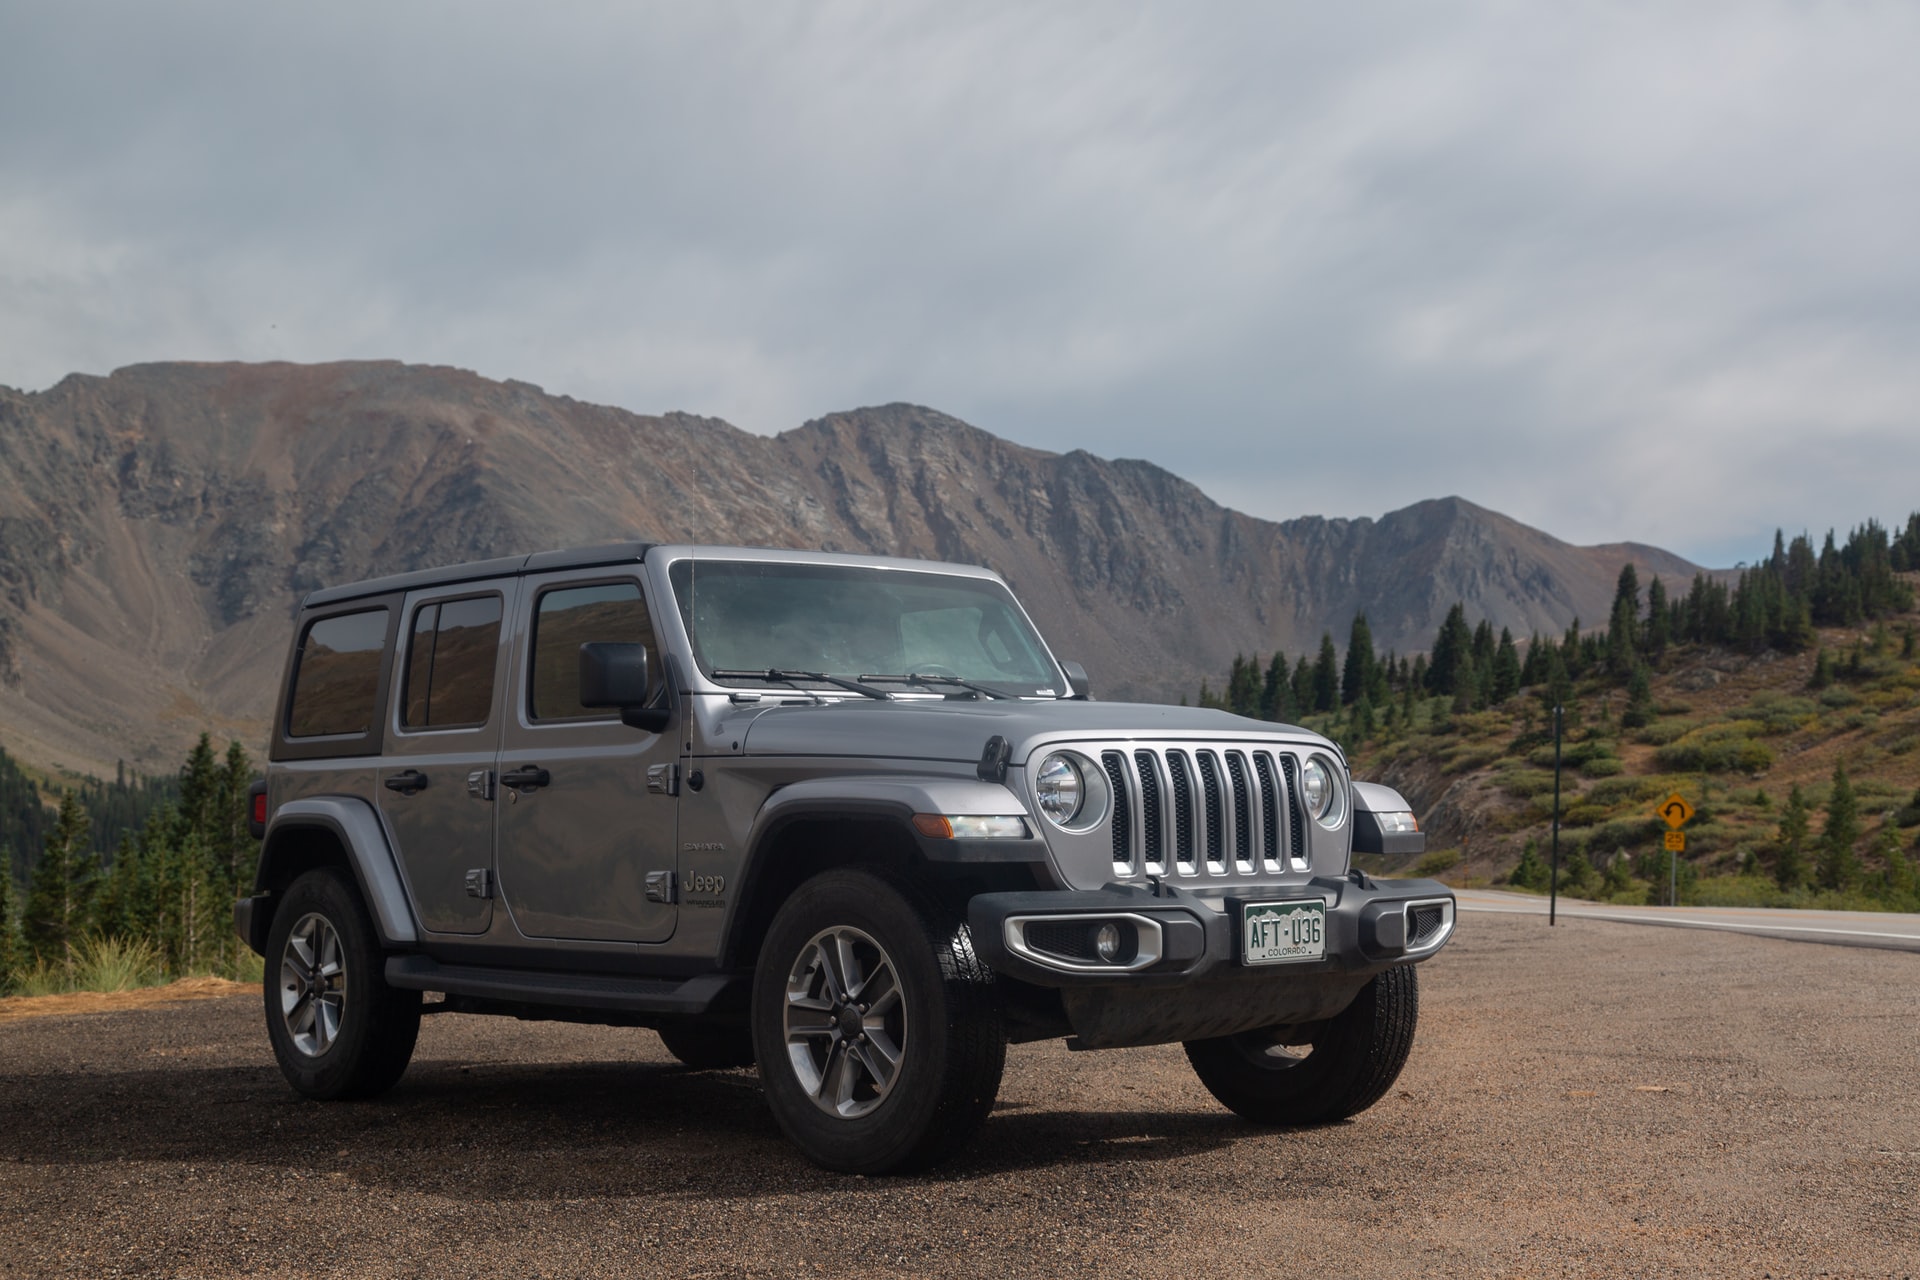 Will Jeep Wrangler Wheels Fit a Grand Cherokee?